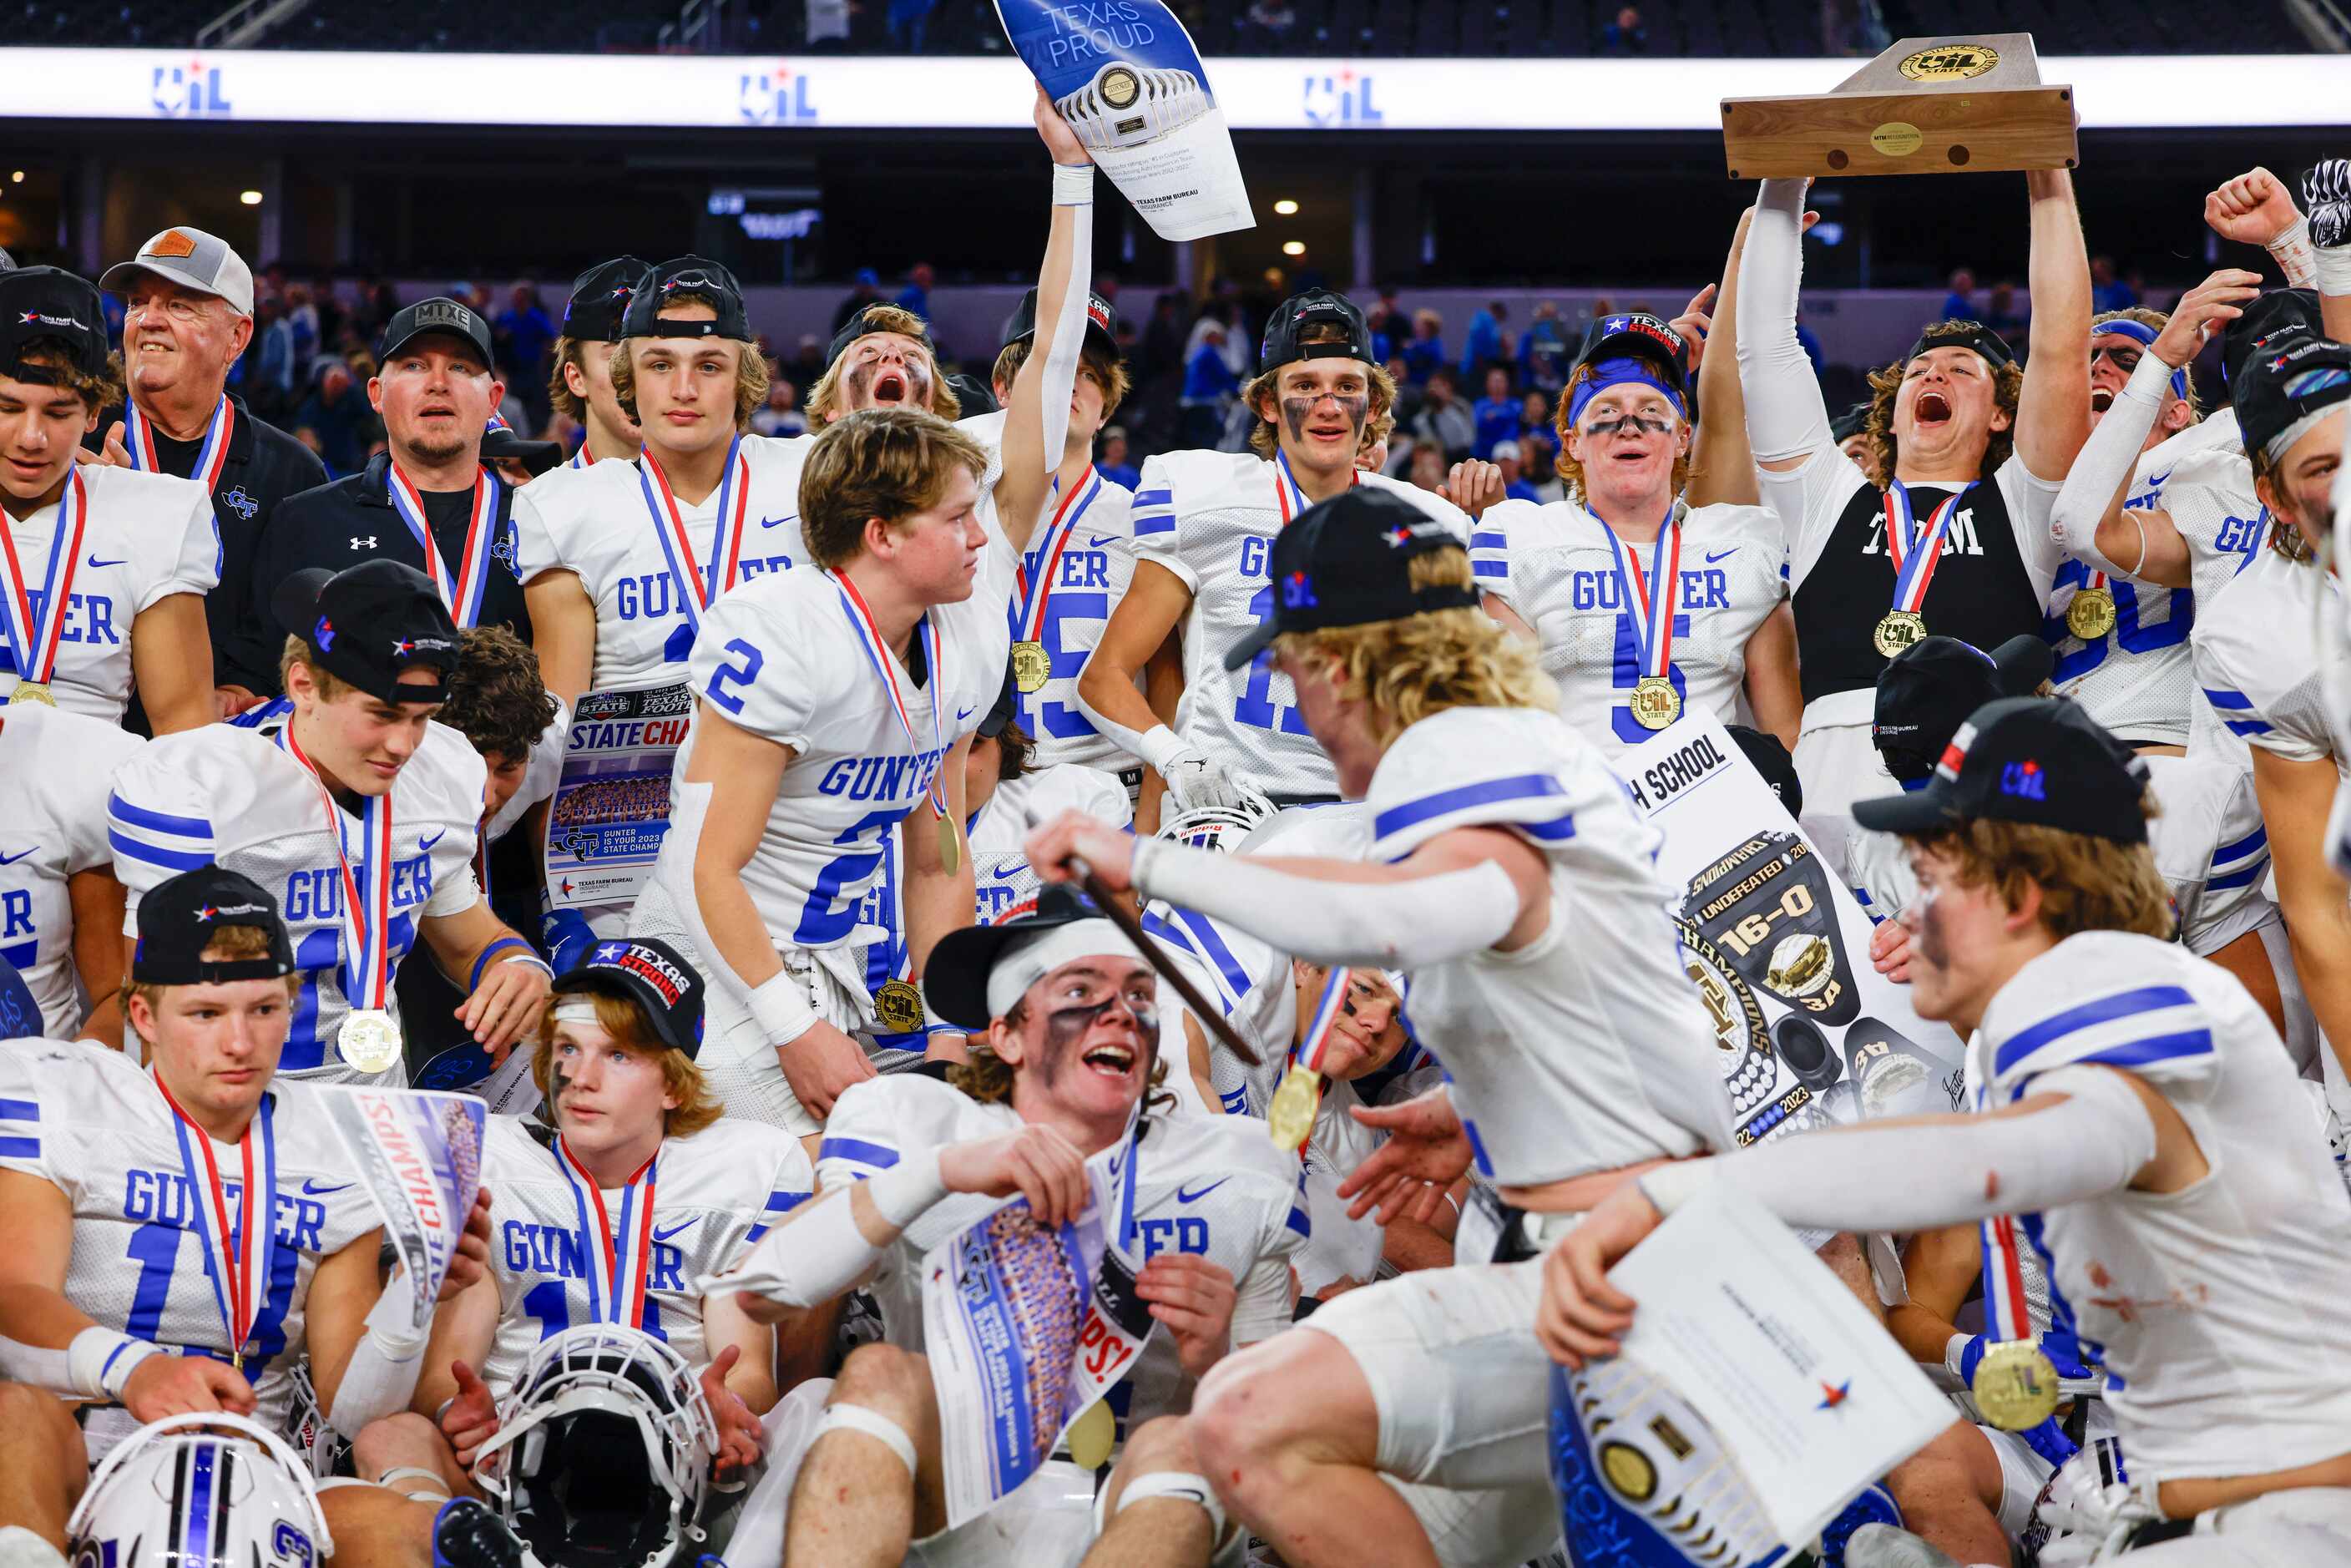 Gunter High players celebrate after winning the Class 3A Division II state championship game...